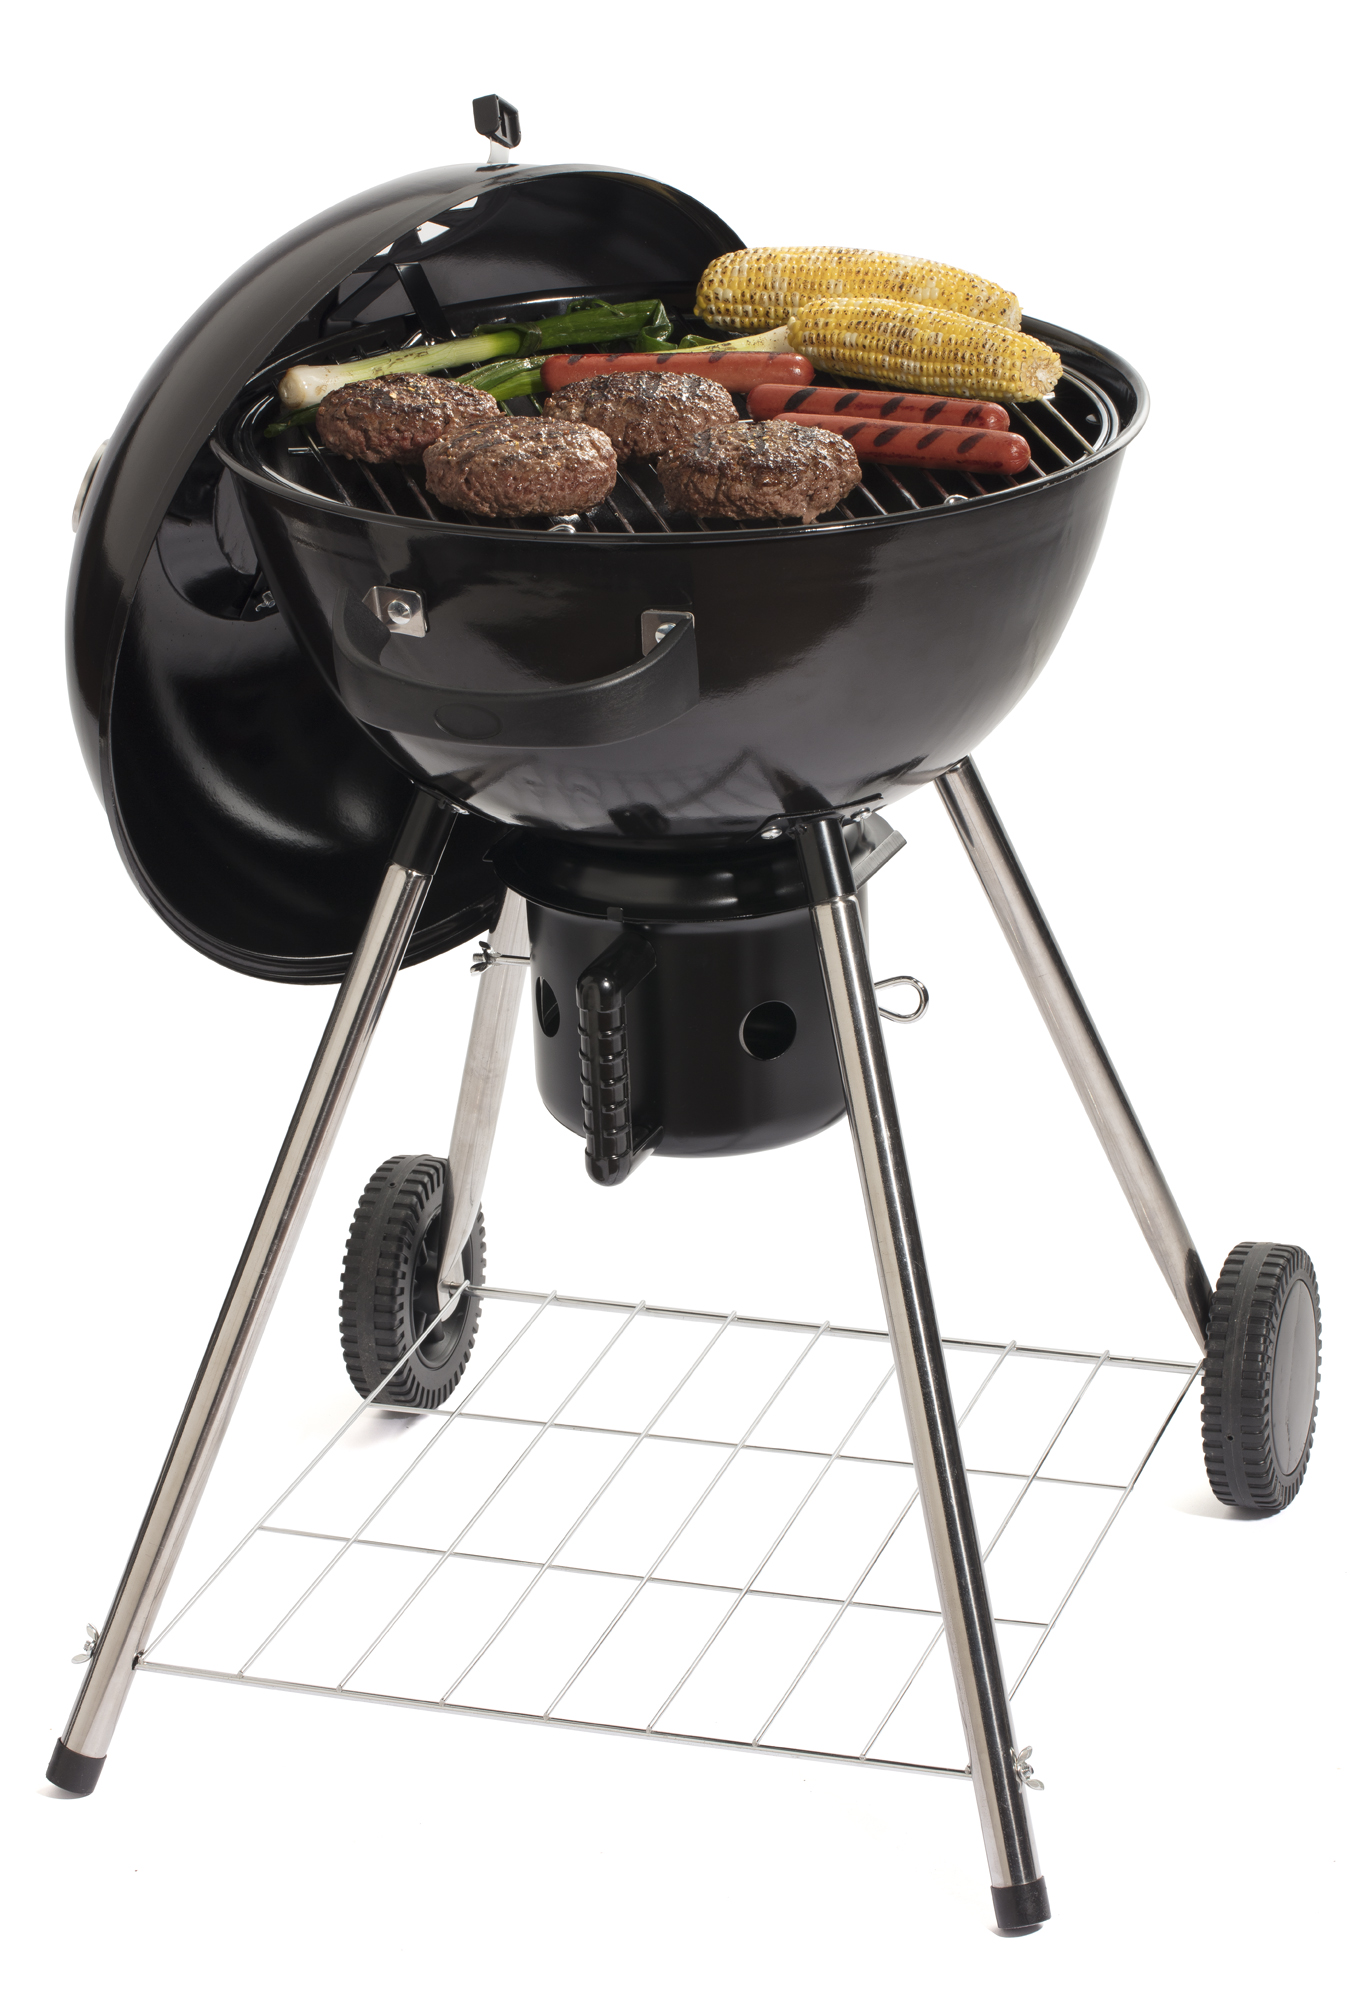 Cuisinart 18' Kettle Charcoal Grill Black - image 2 of 8